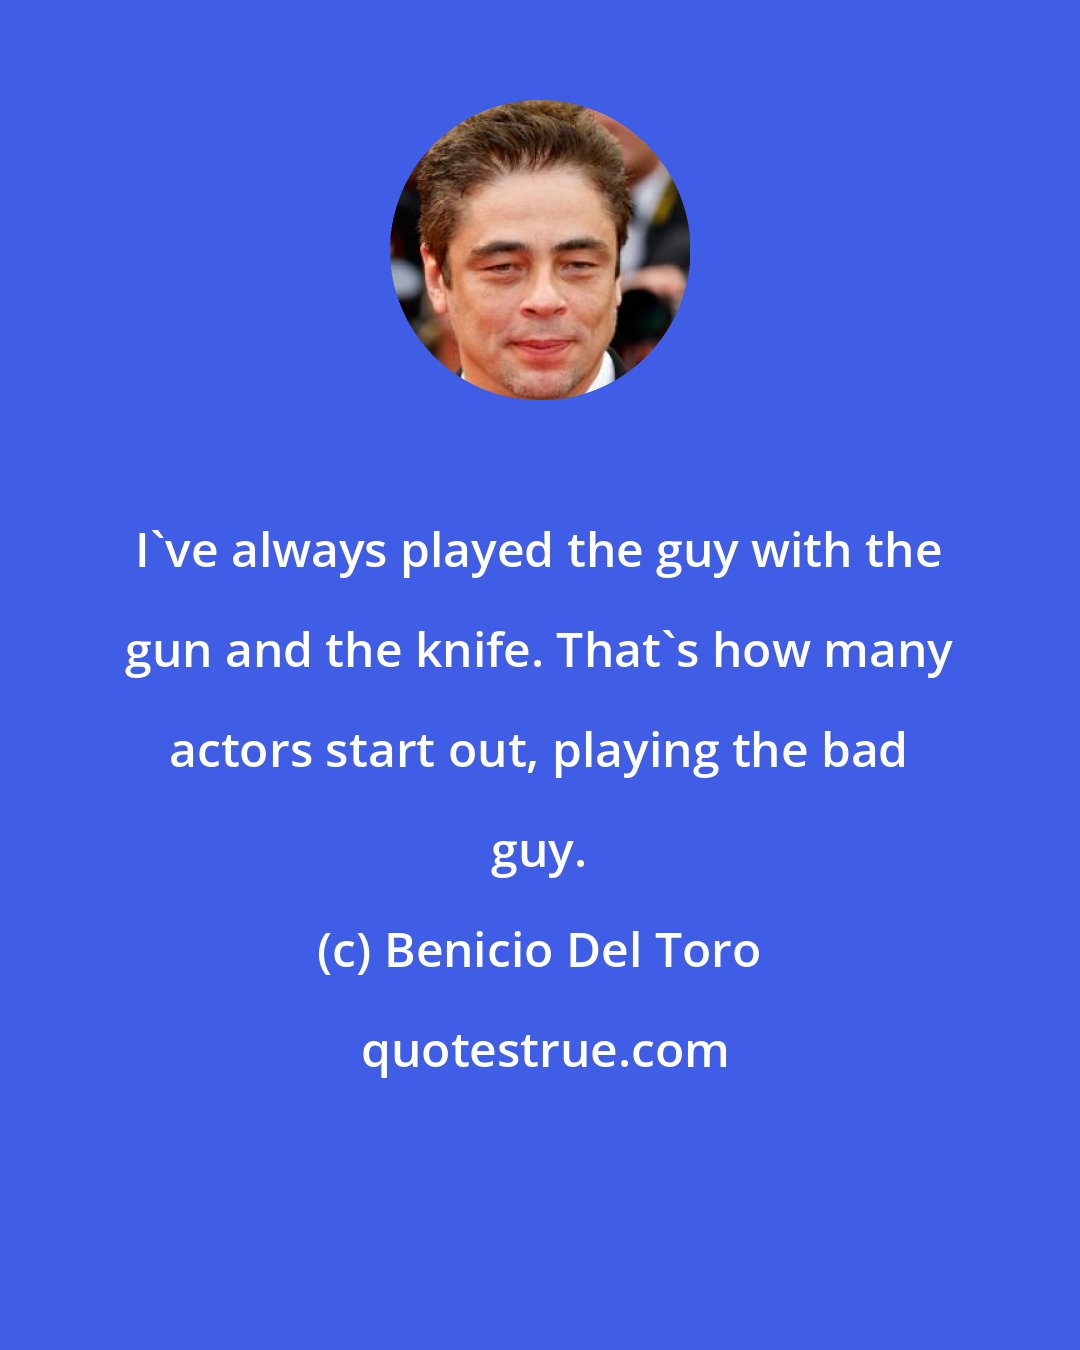 Benicio Del Toro: I've always played the guy with the gun and the knife. That's how many actors start out, playing the bad guy.